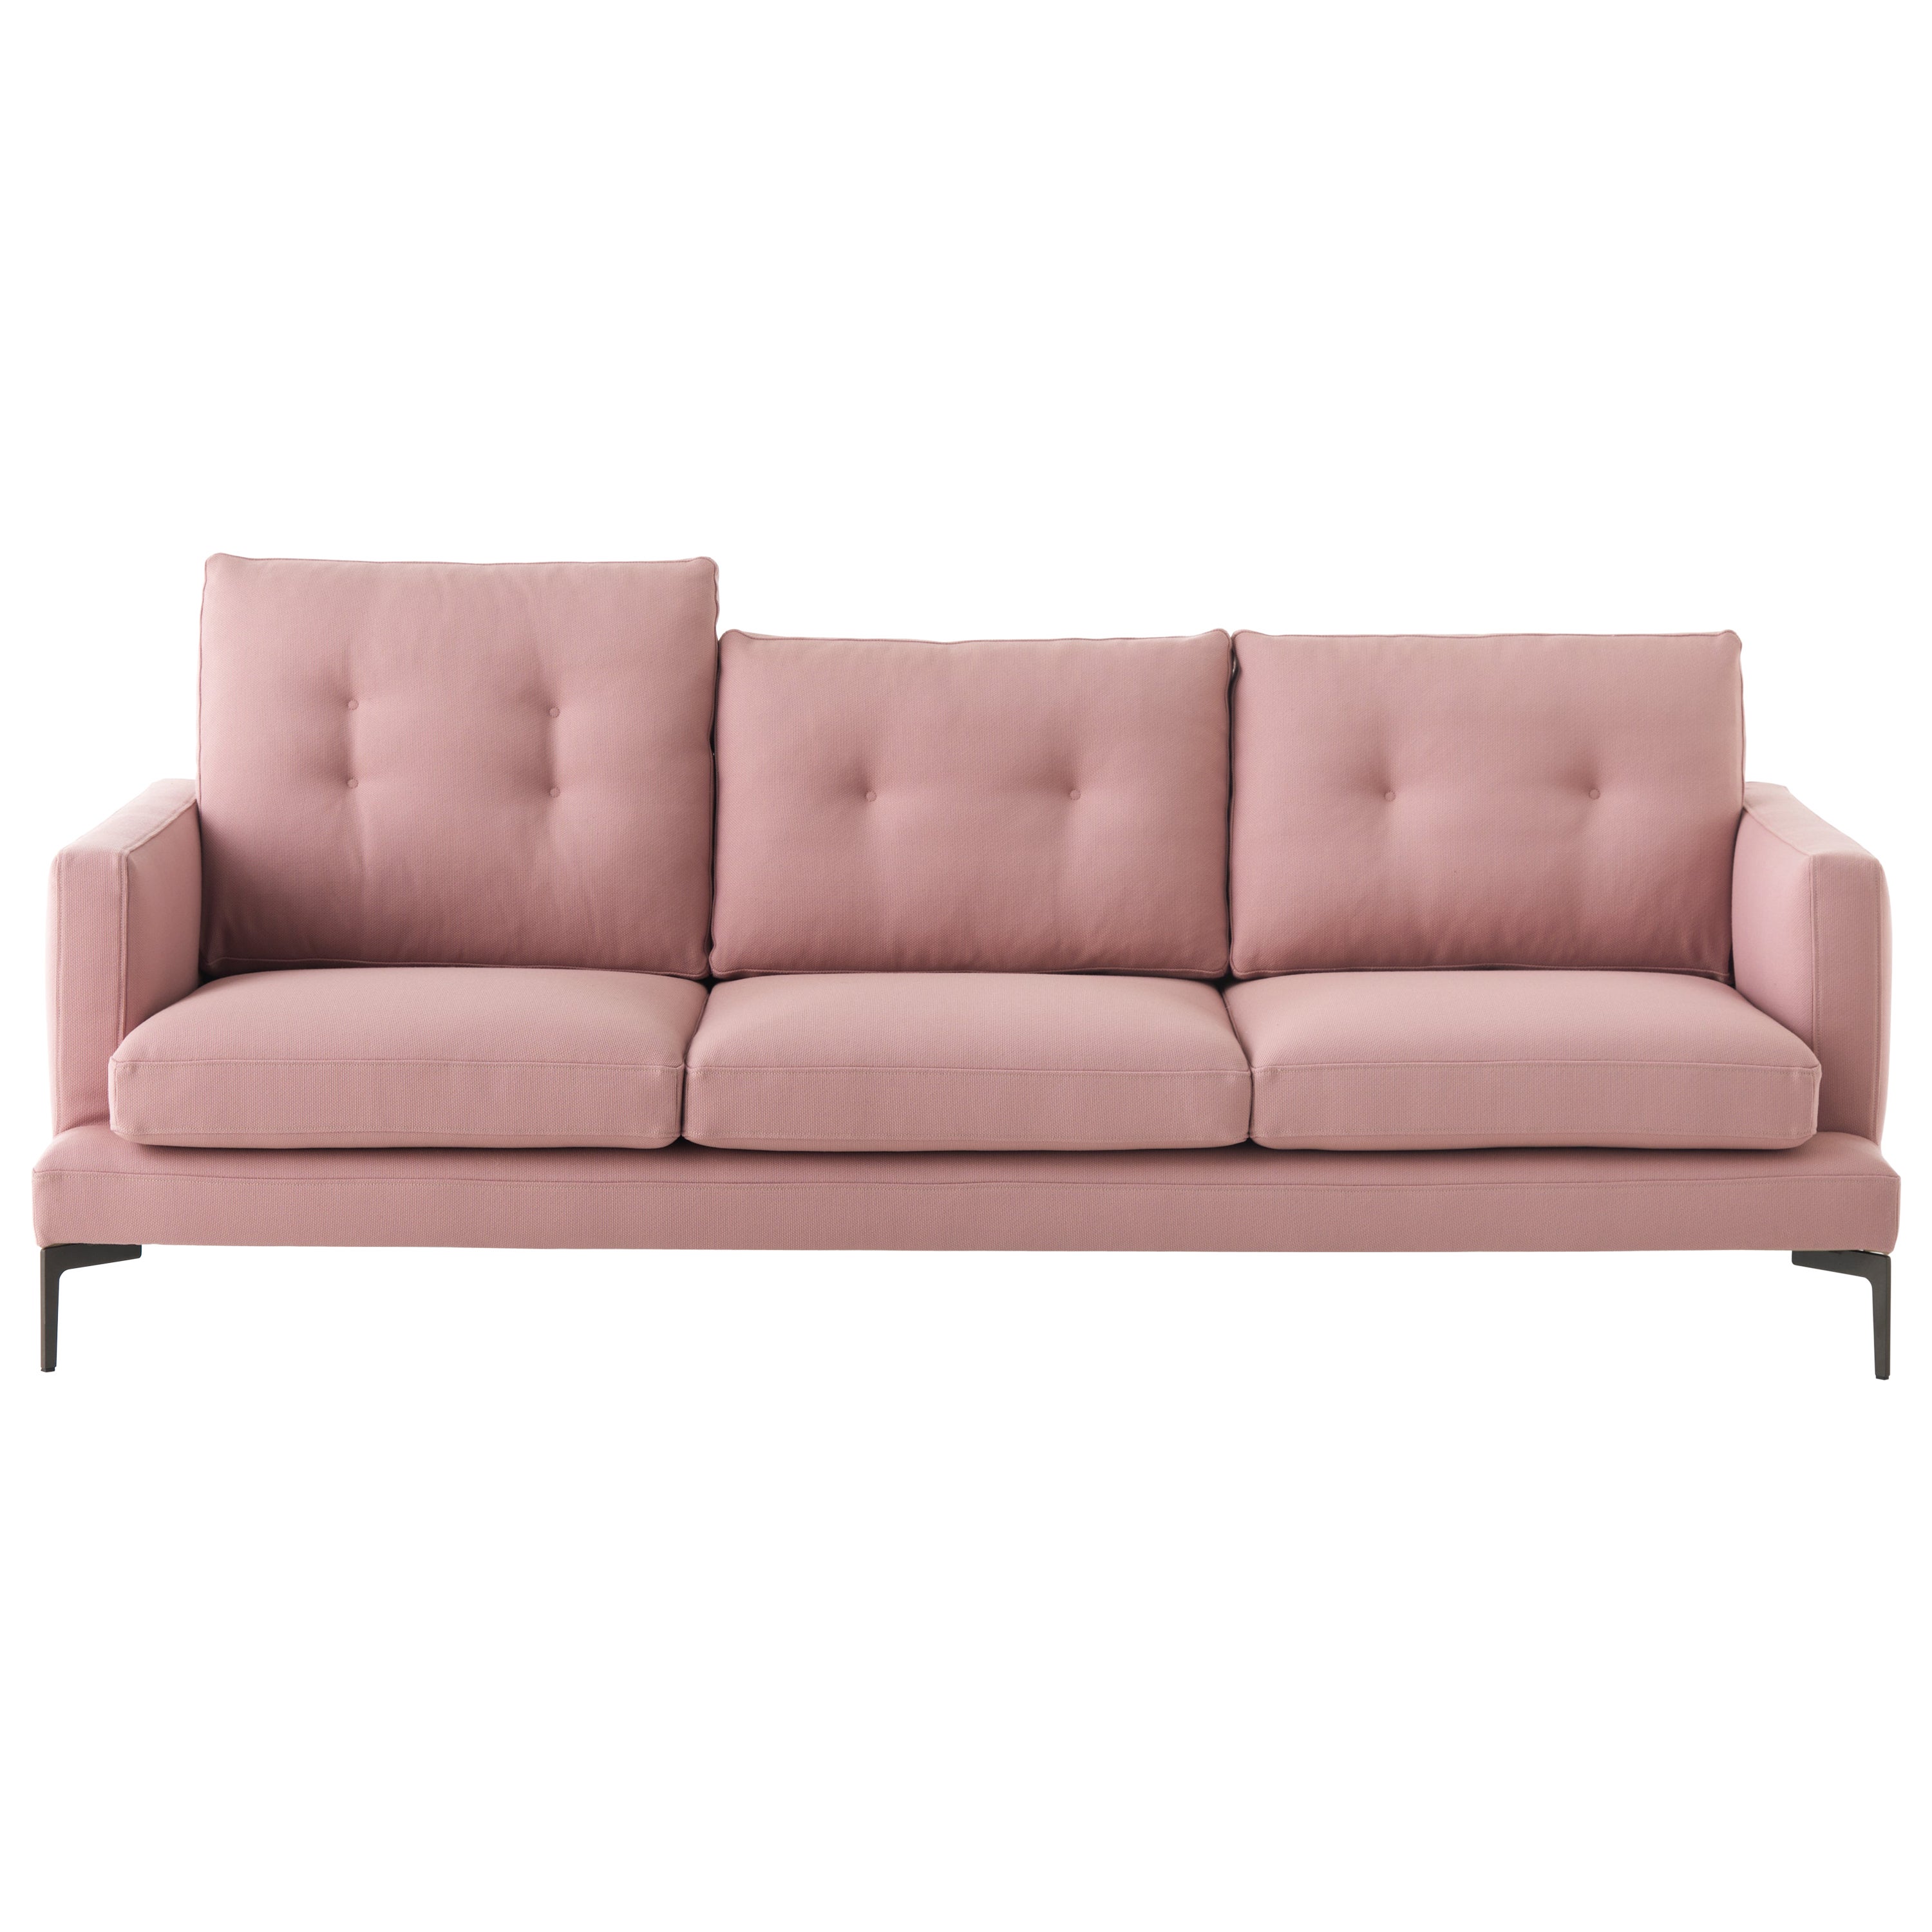 Essentiel 3-Seat 250 High Cushion Sofa in Braided Pink Upholstery, Sergio Bicego For Sale